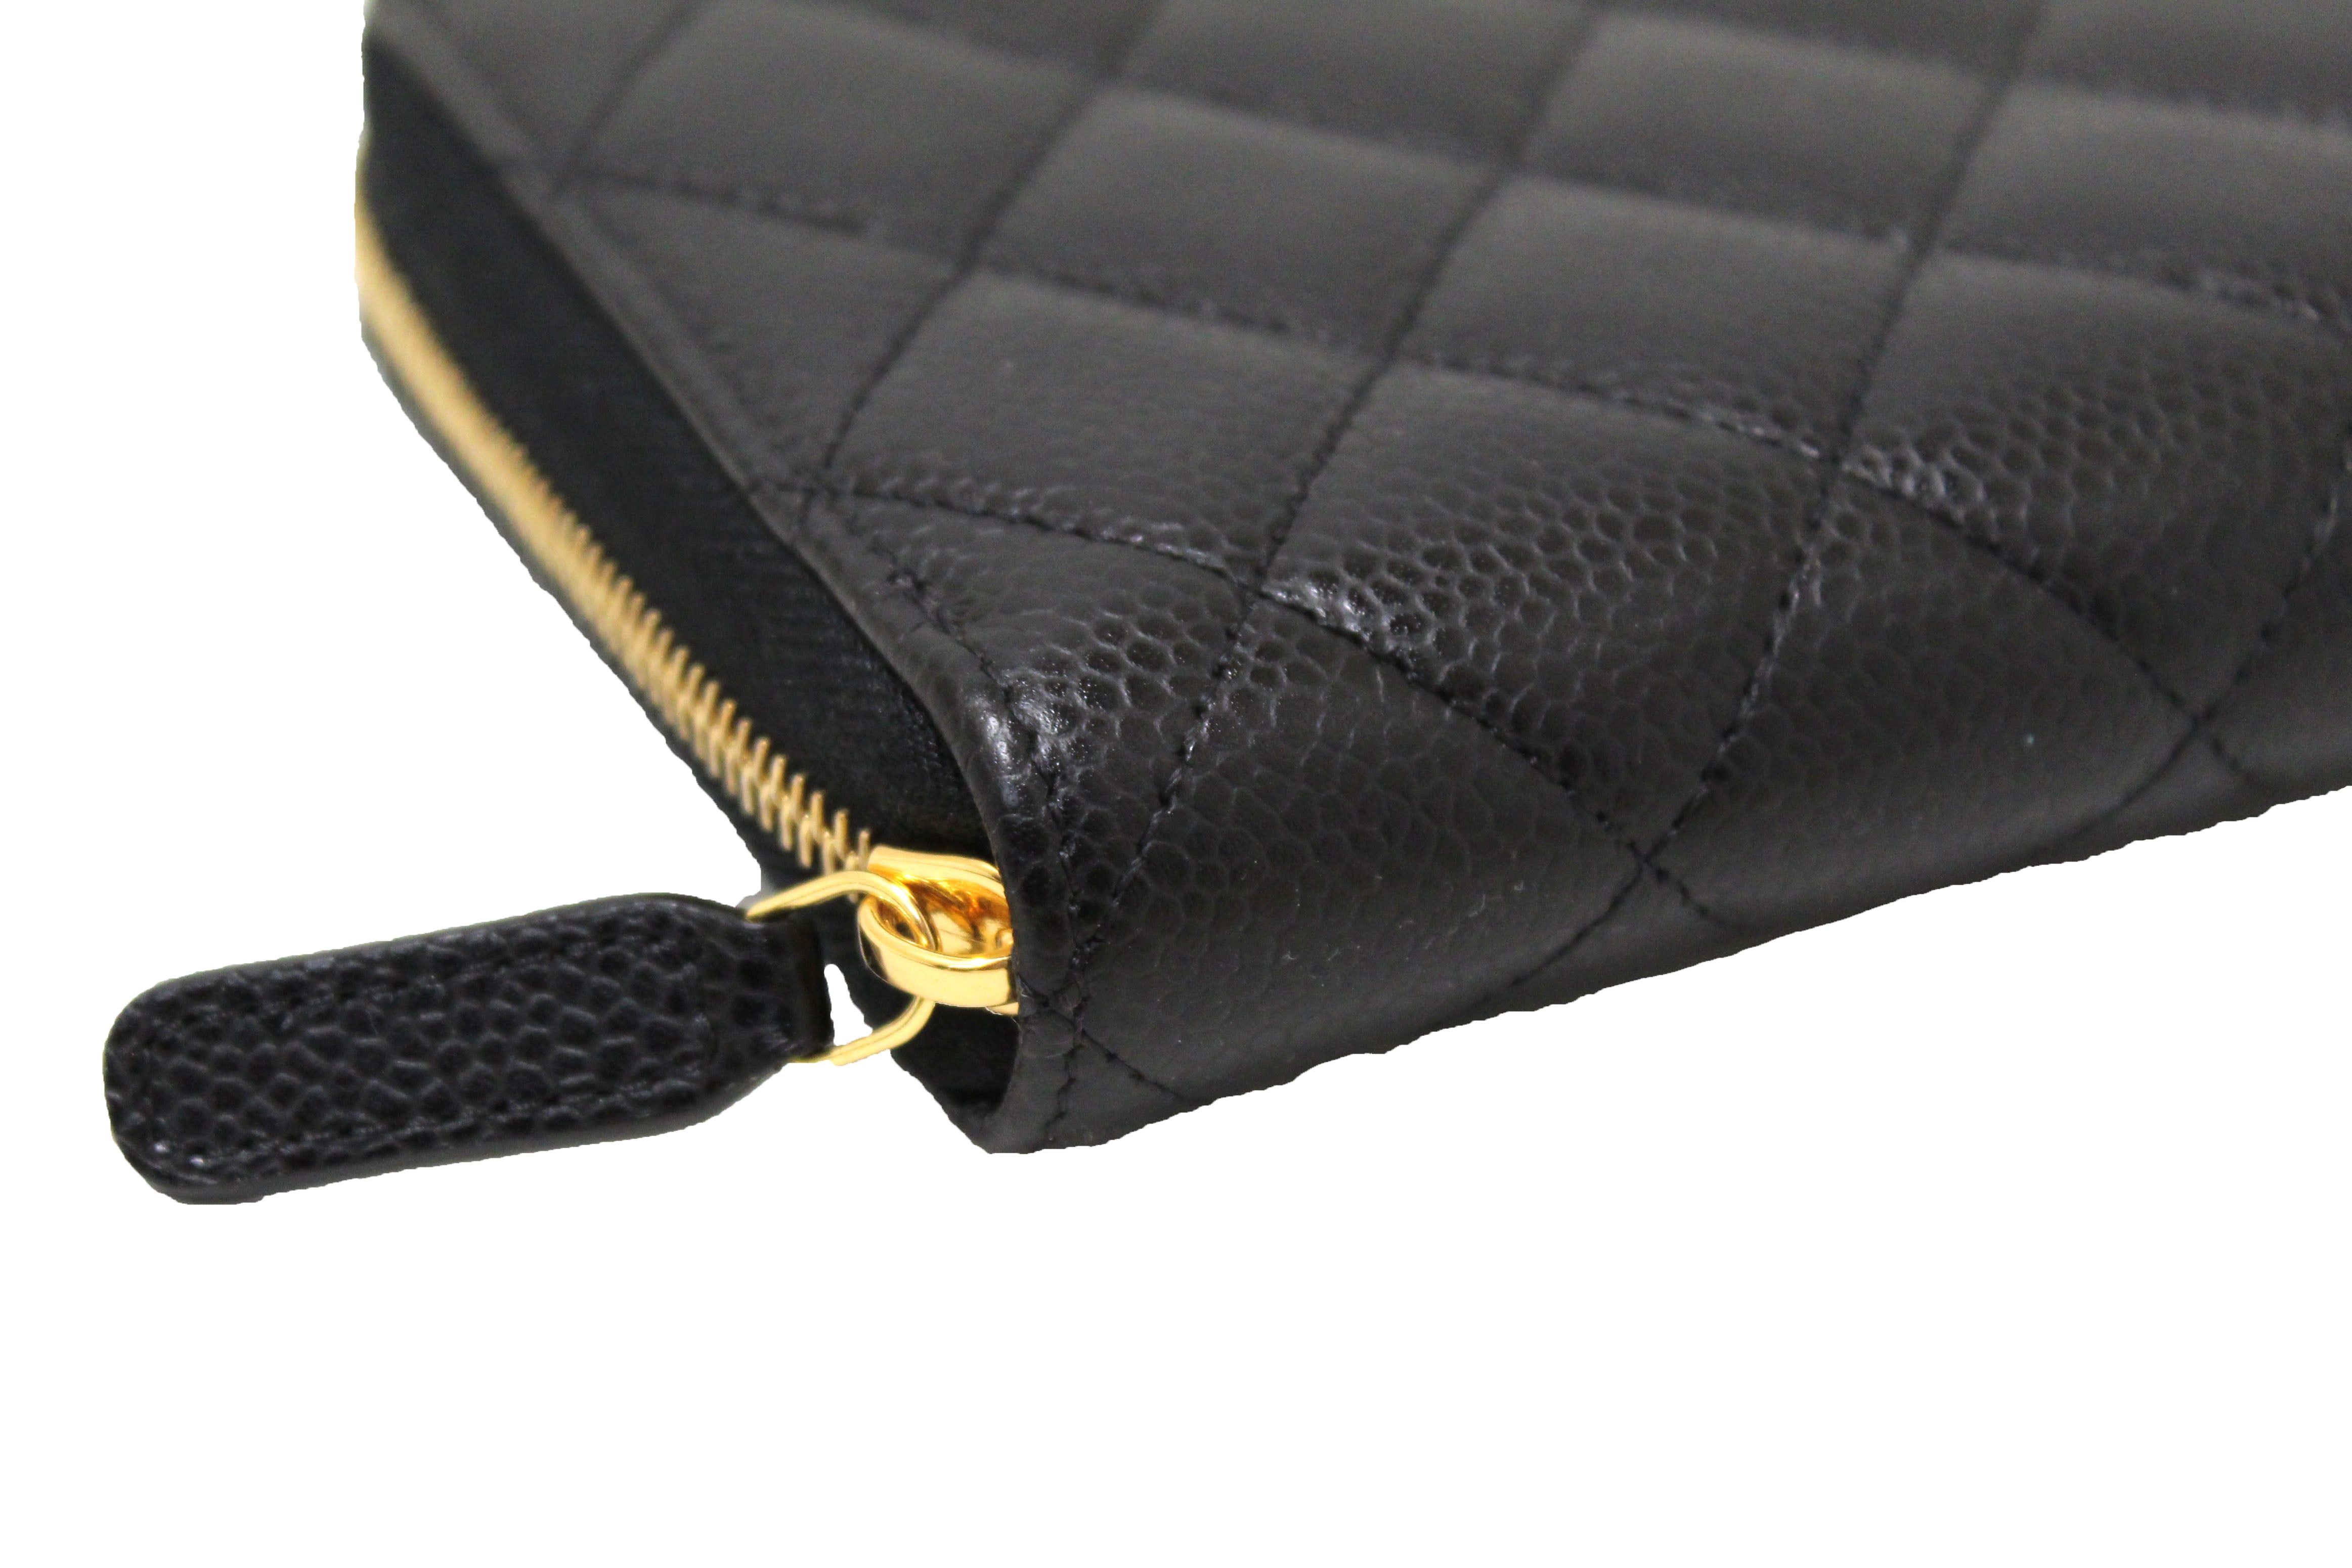 Authentic Chanel Black Lambskin Quilted Zipper Wallet